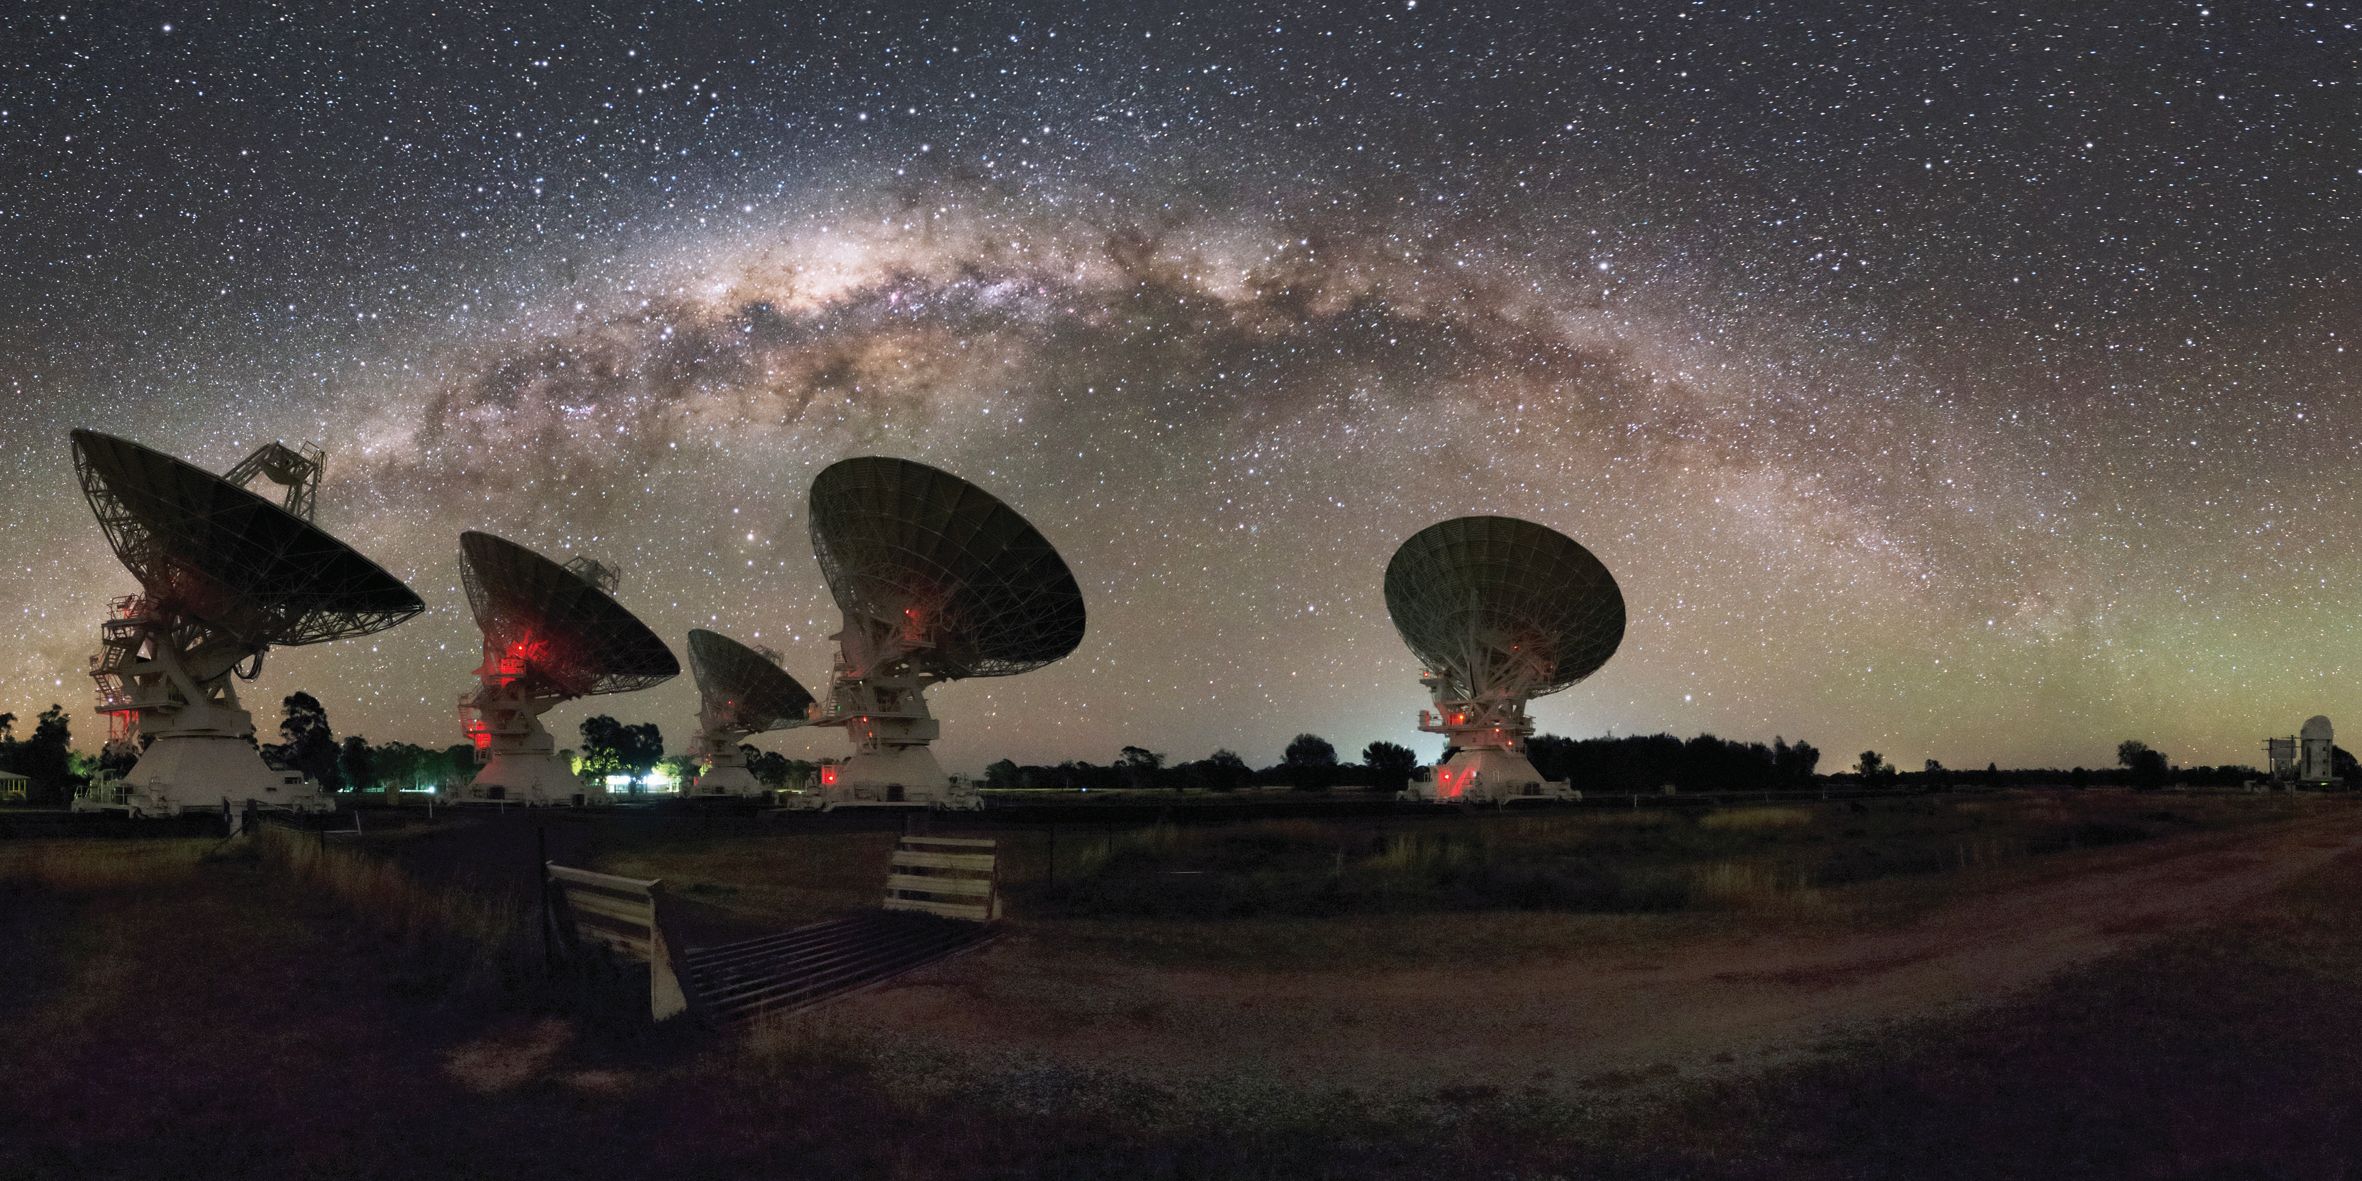 A composite image of the Milky Way above the Australia Telescope Compact Array, which has been utilised in the study of fast radio bursts in recent years. A series of recent discoveries, including the detection of the first-ever repeating fast radio burst, has added new layers to the existing mystery of this elusive cosmic phenomenon. Image Credit: Alex Cherney 